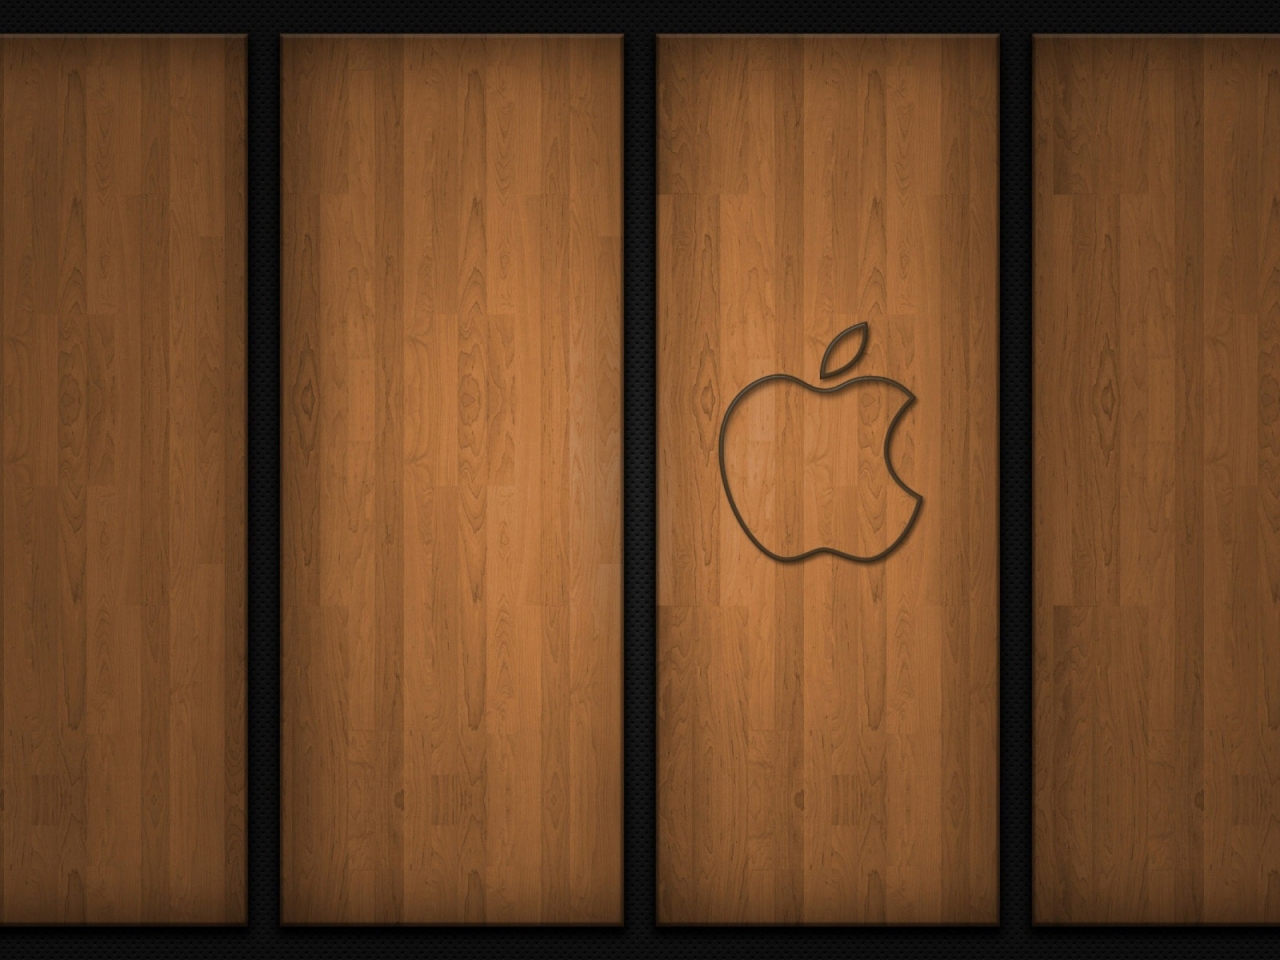 Apple logo on wood for 1280 x 960 resolution